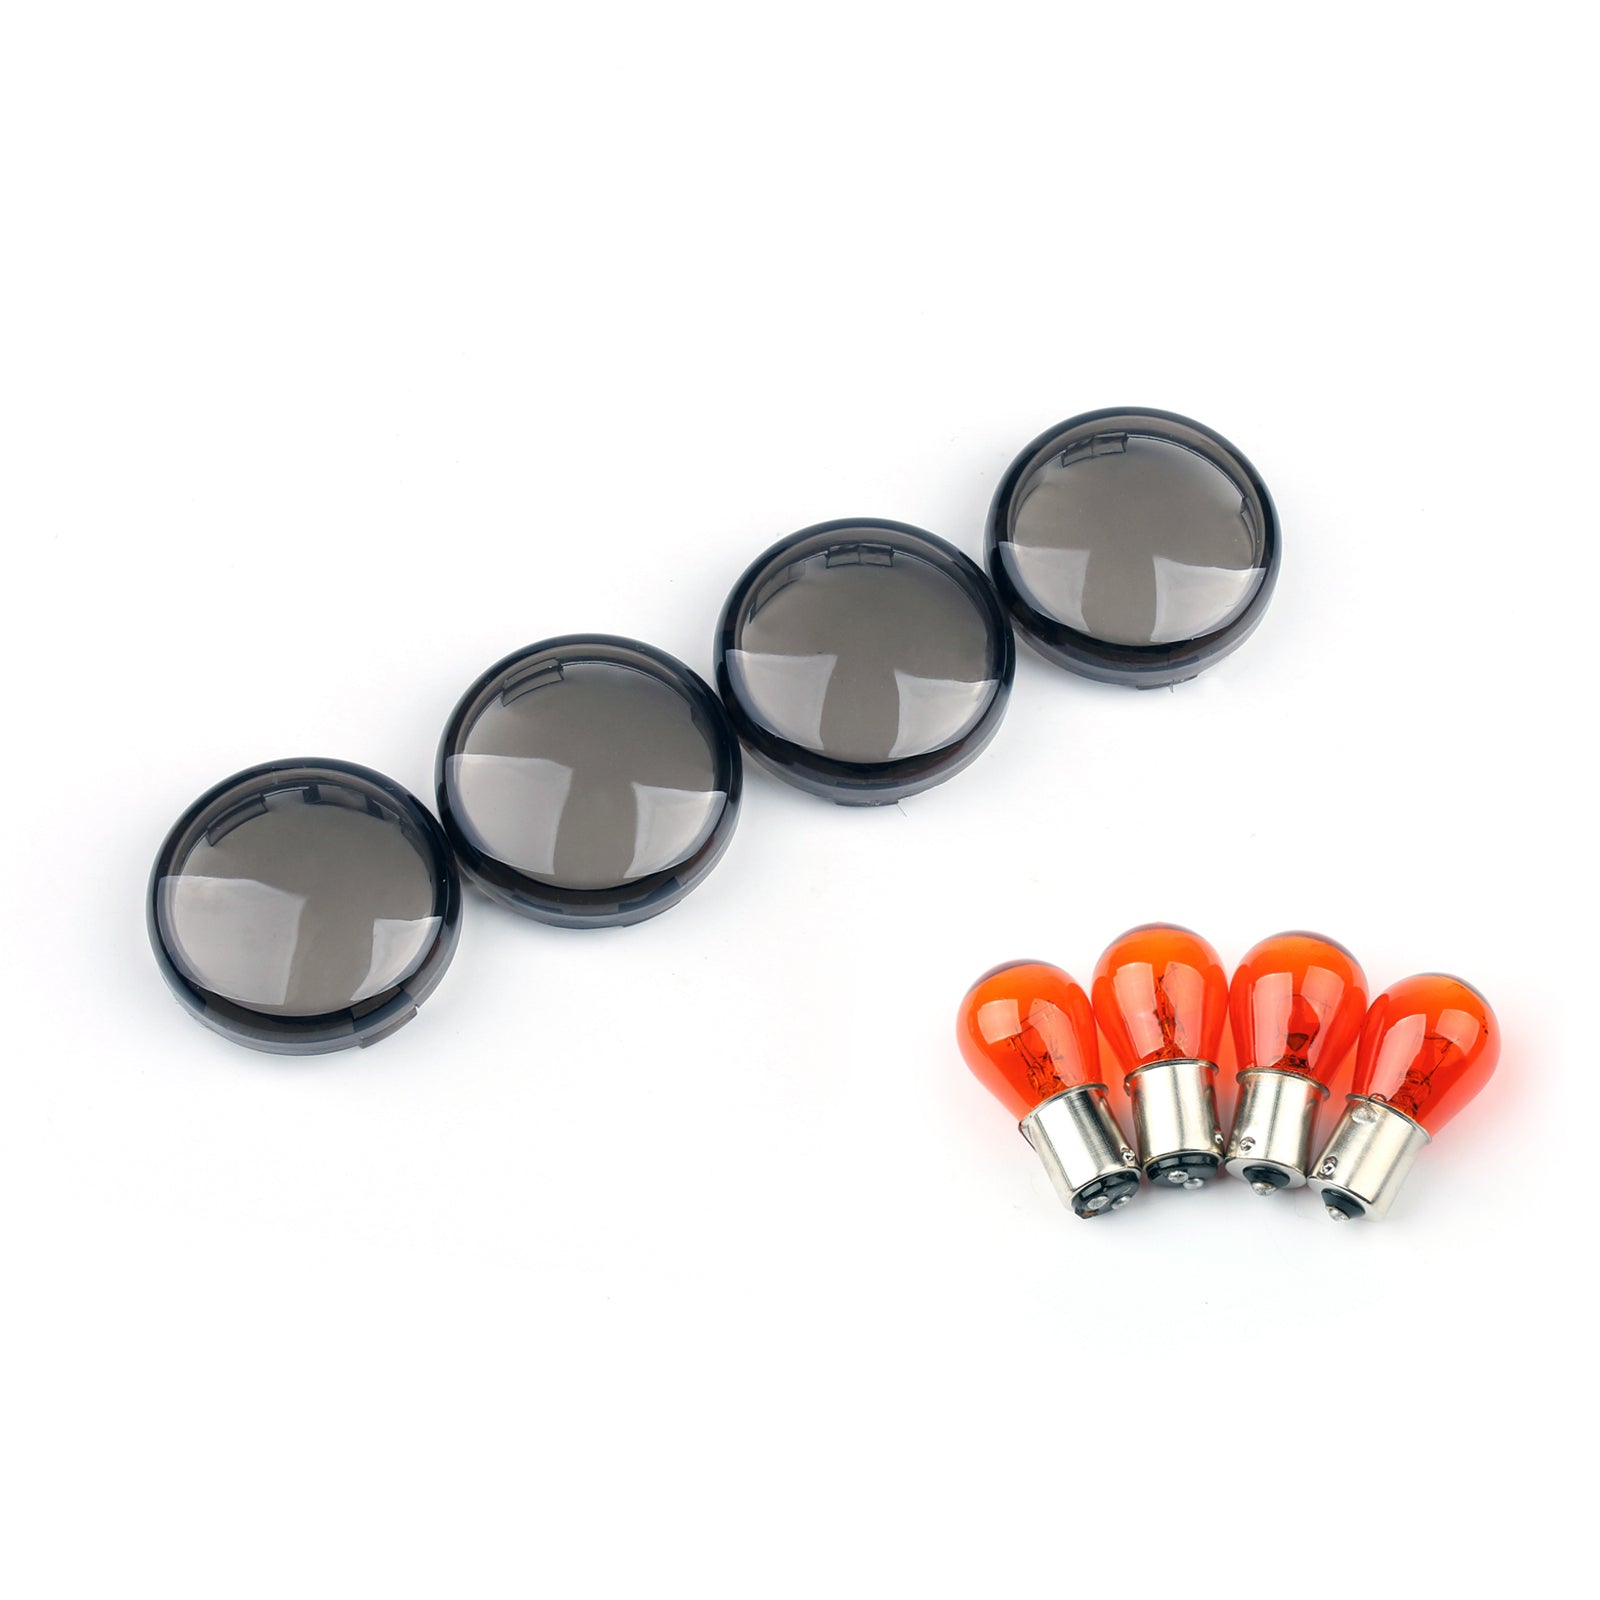 4x Turn Signal Lens For Bulbs For Harley Softail Dyna Sportsters 2002 &Up